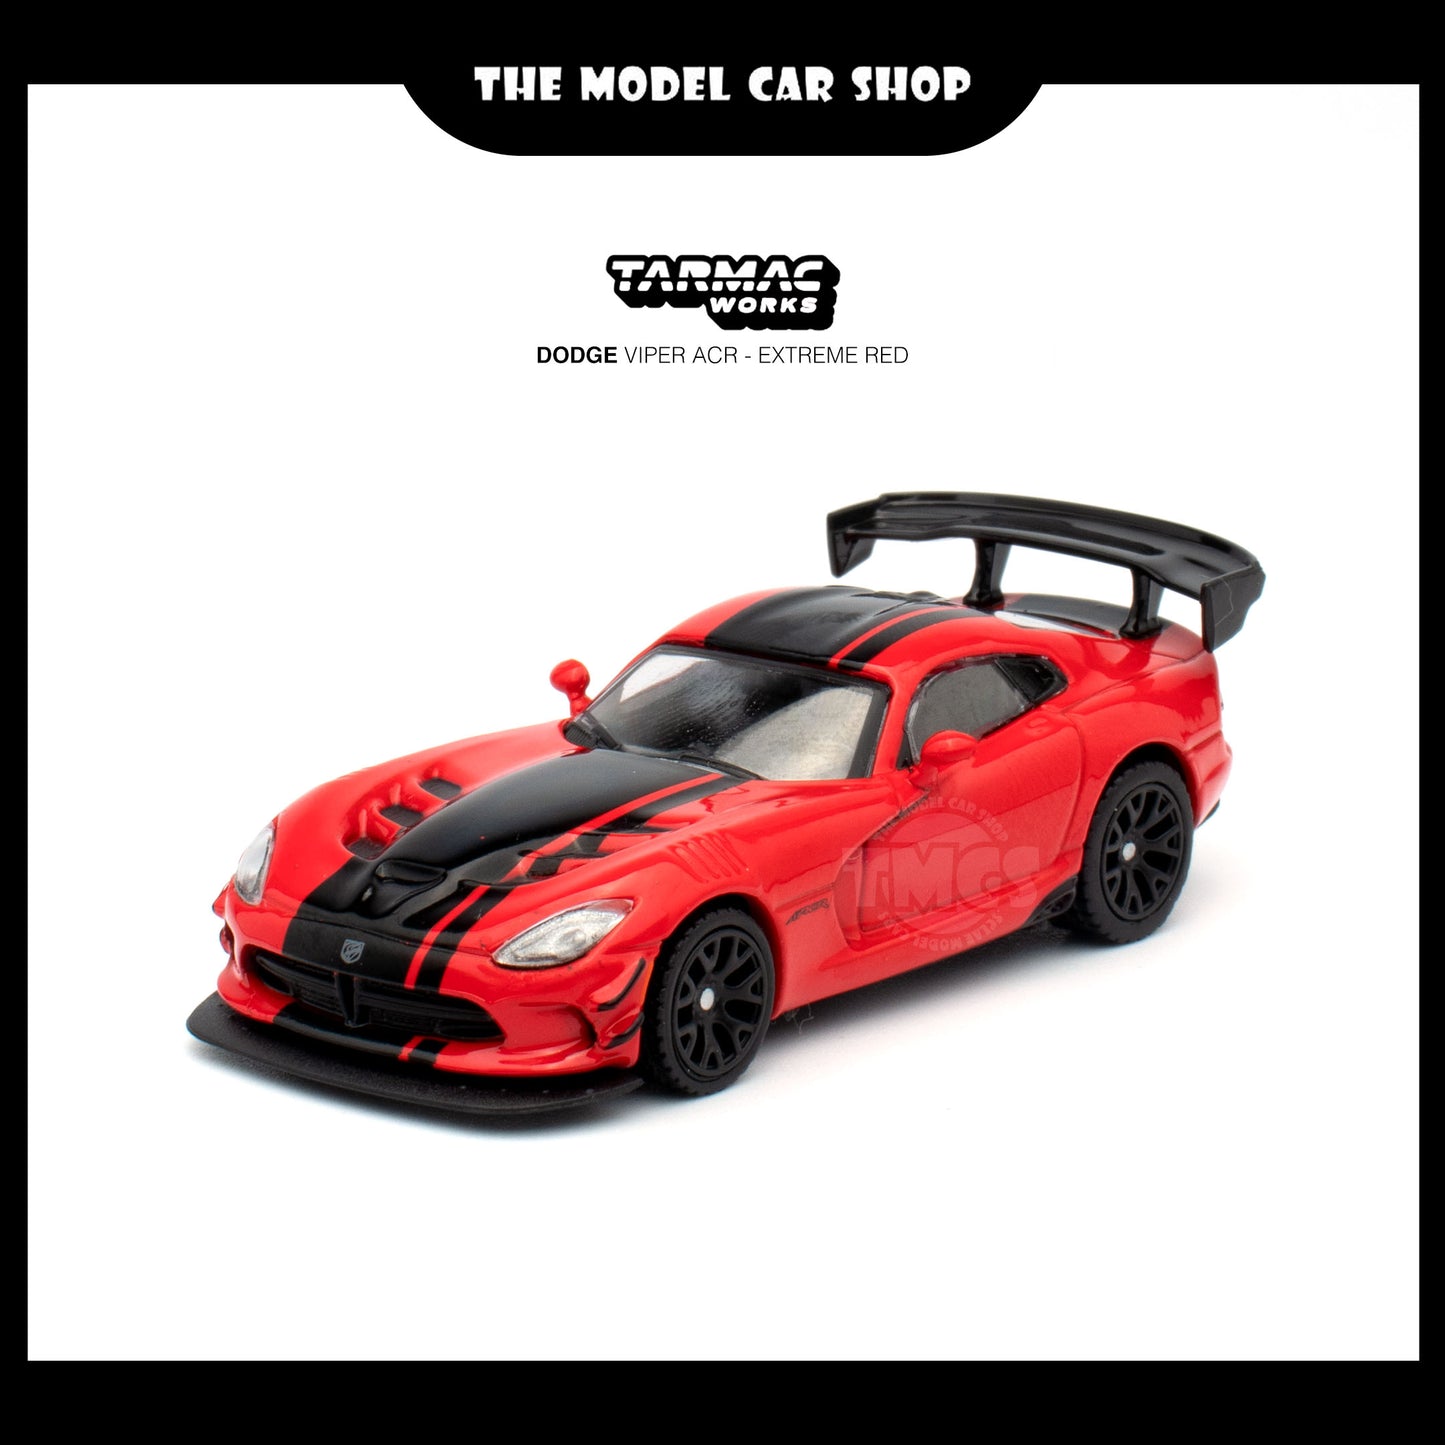 [Tarmac Works] Dodge Viper ACR - Extreme Red